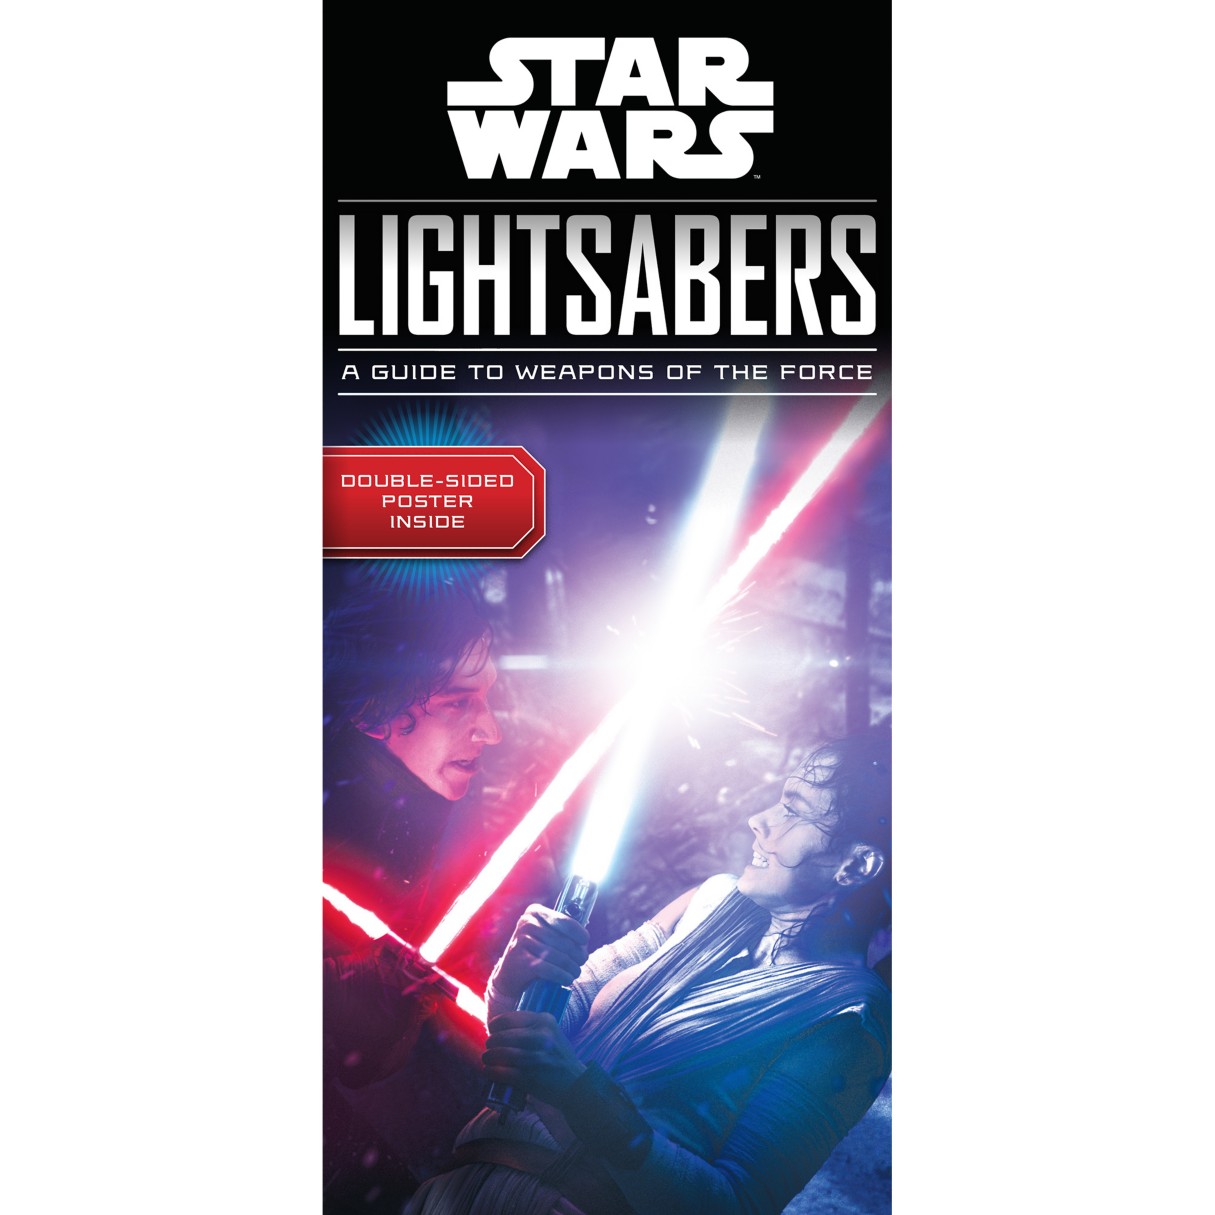 Star Wars Lightsabers: A Guide to Weapons of the Force Book